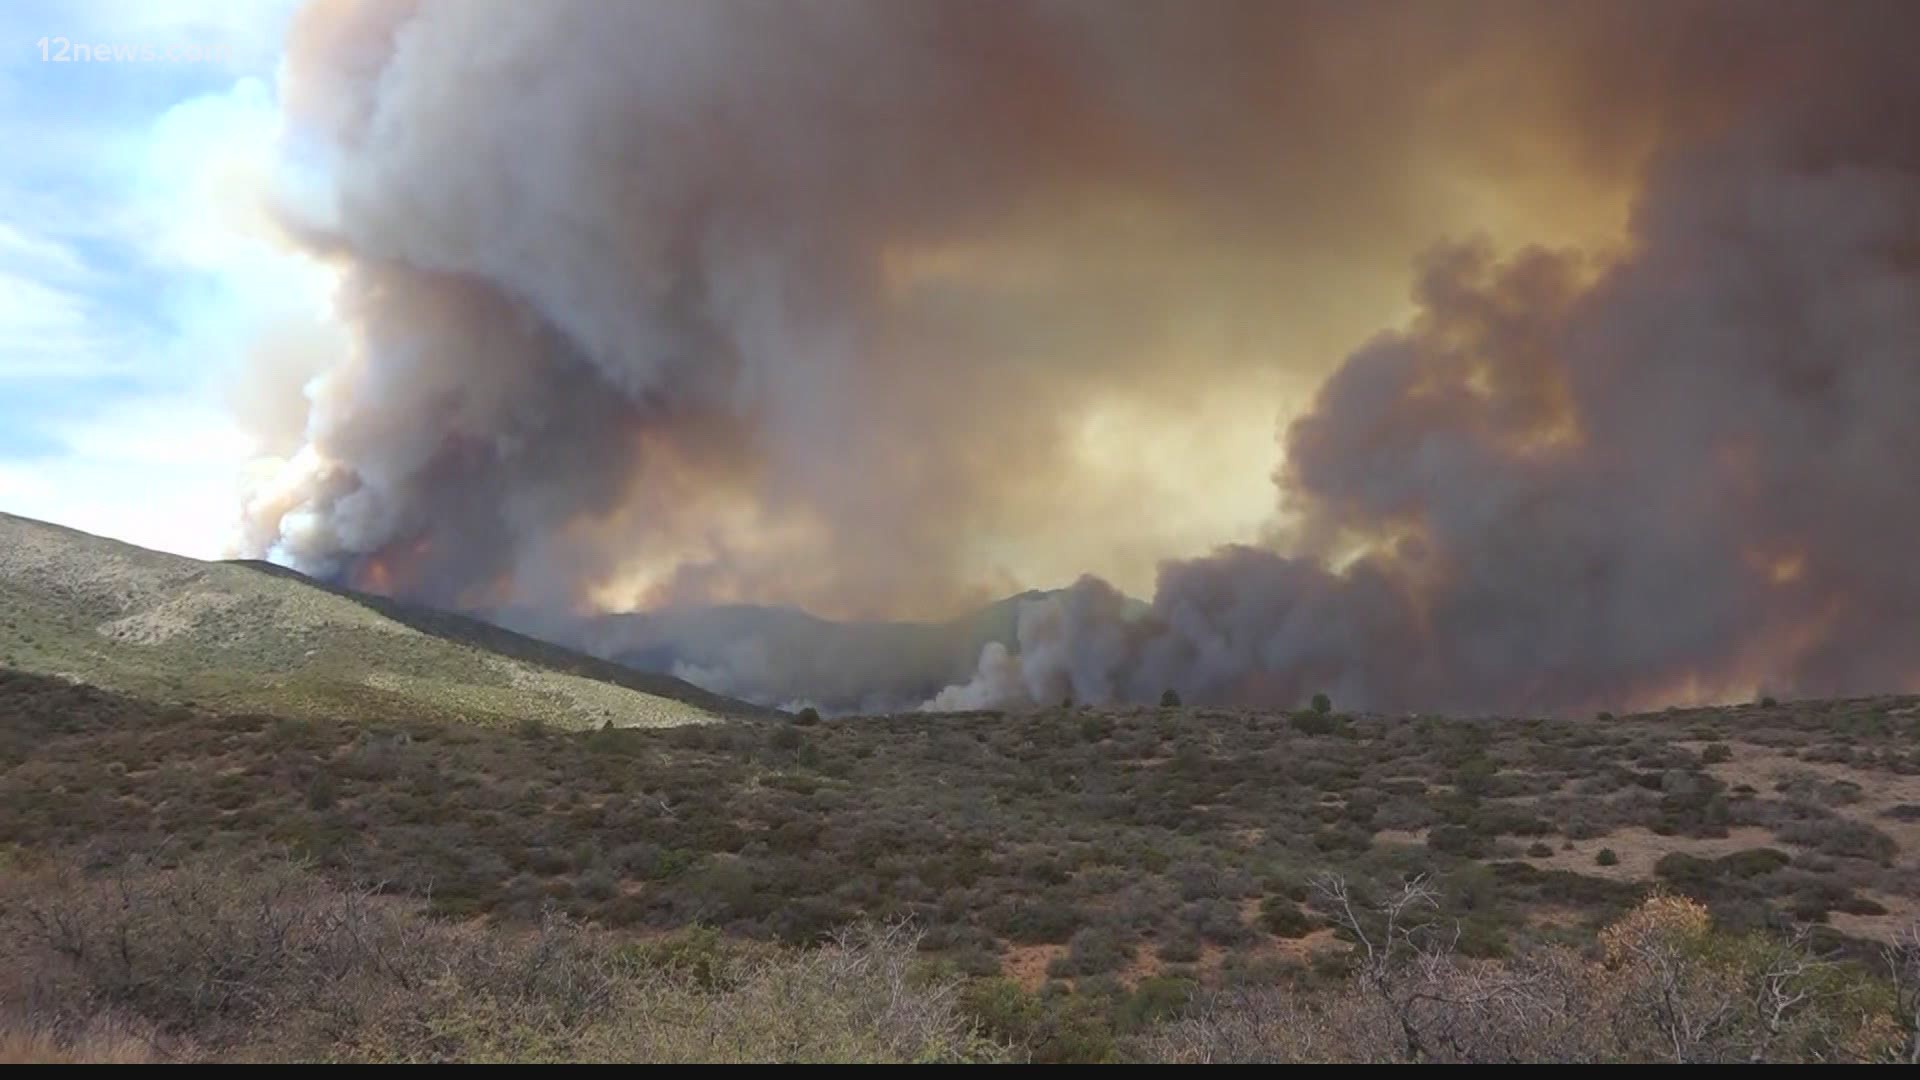 It's a delicate dance in the sky and on the ground as crews scramble to contain multiple wildfires in Arizona.